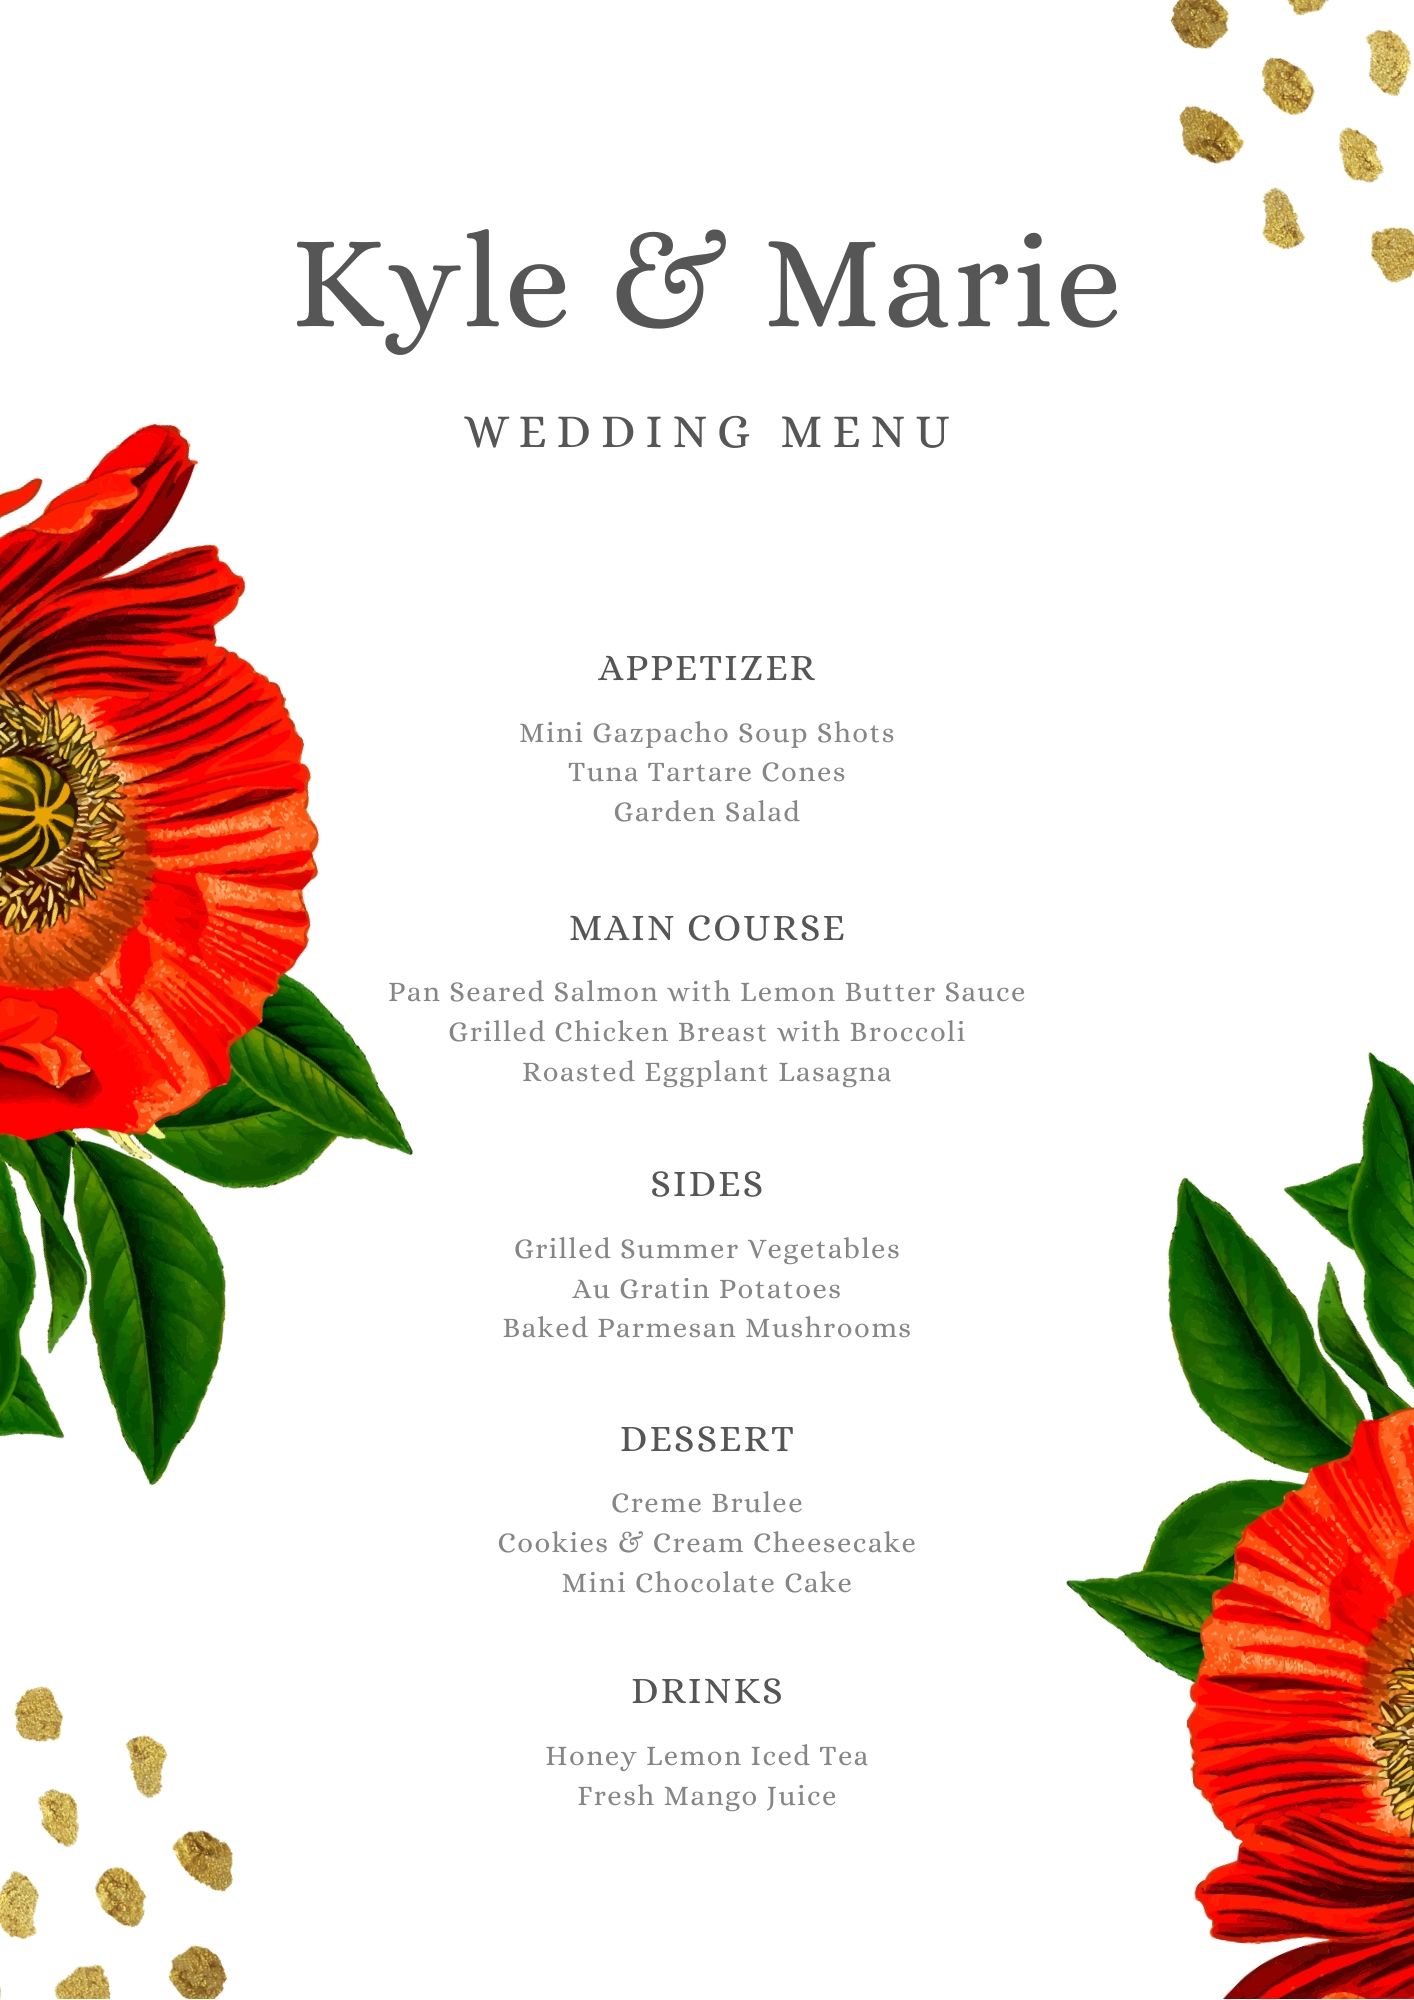 Canva offers wedding menus, featured modern wedding templates, wedding invitations, save the date cards and more